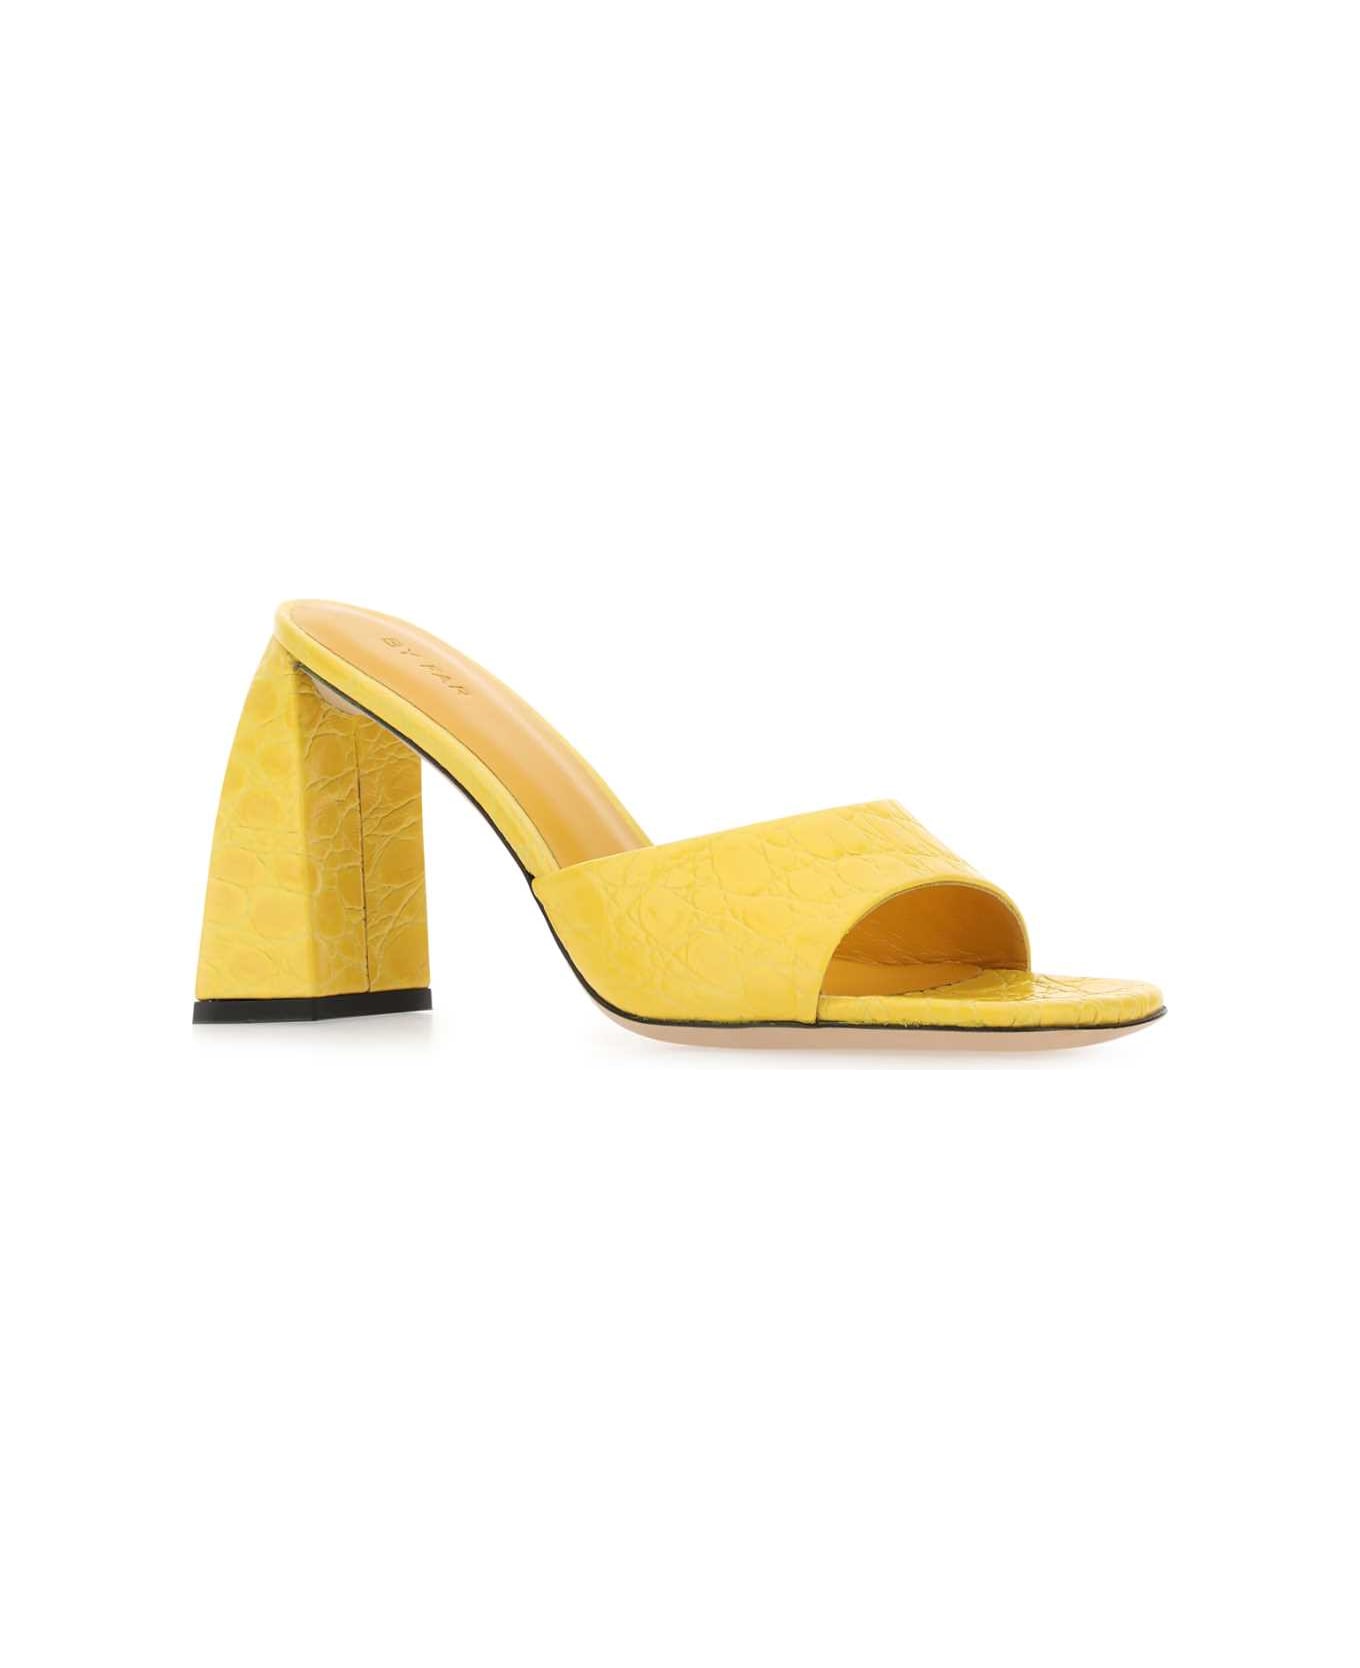 BY FAR Yellow Leather Michele Mules - Yellow